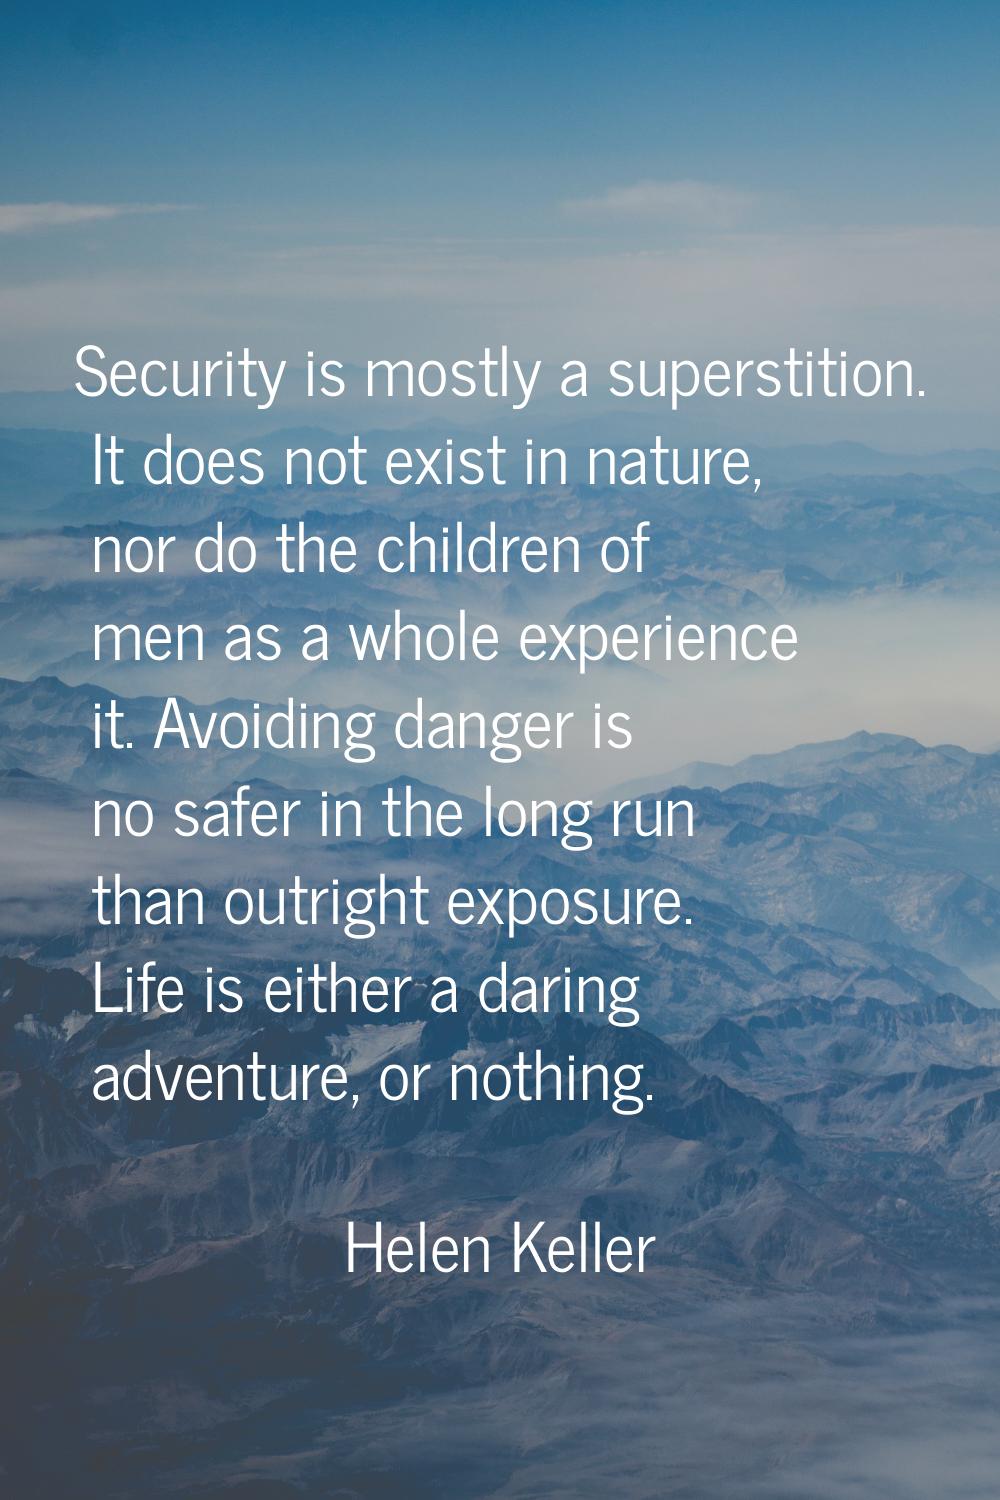 Security is mostly a superstition. It does not exist in nature, nor do the children of men as a who